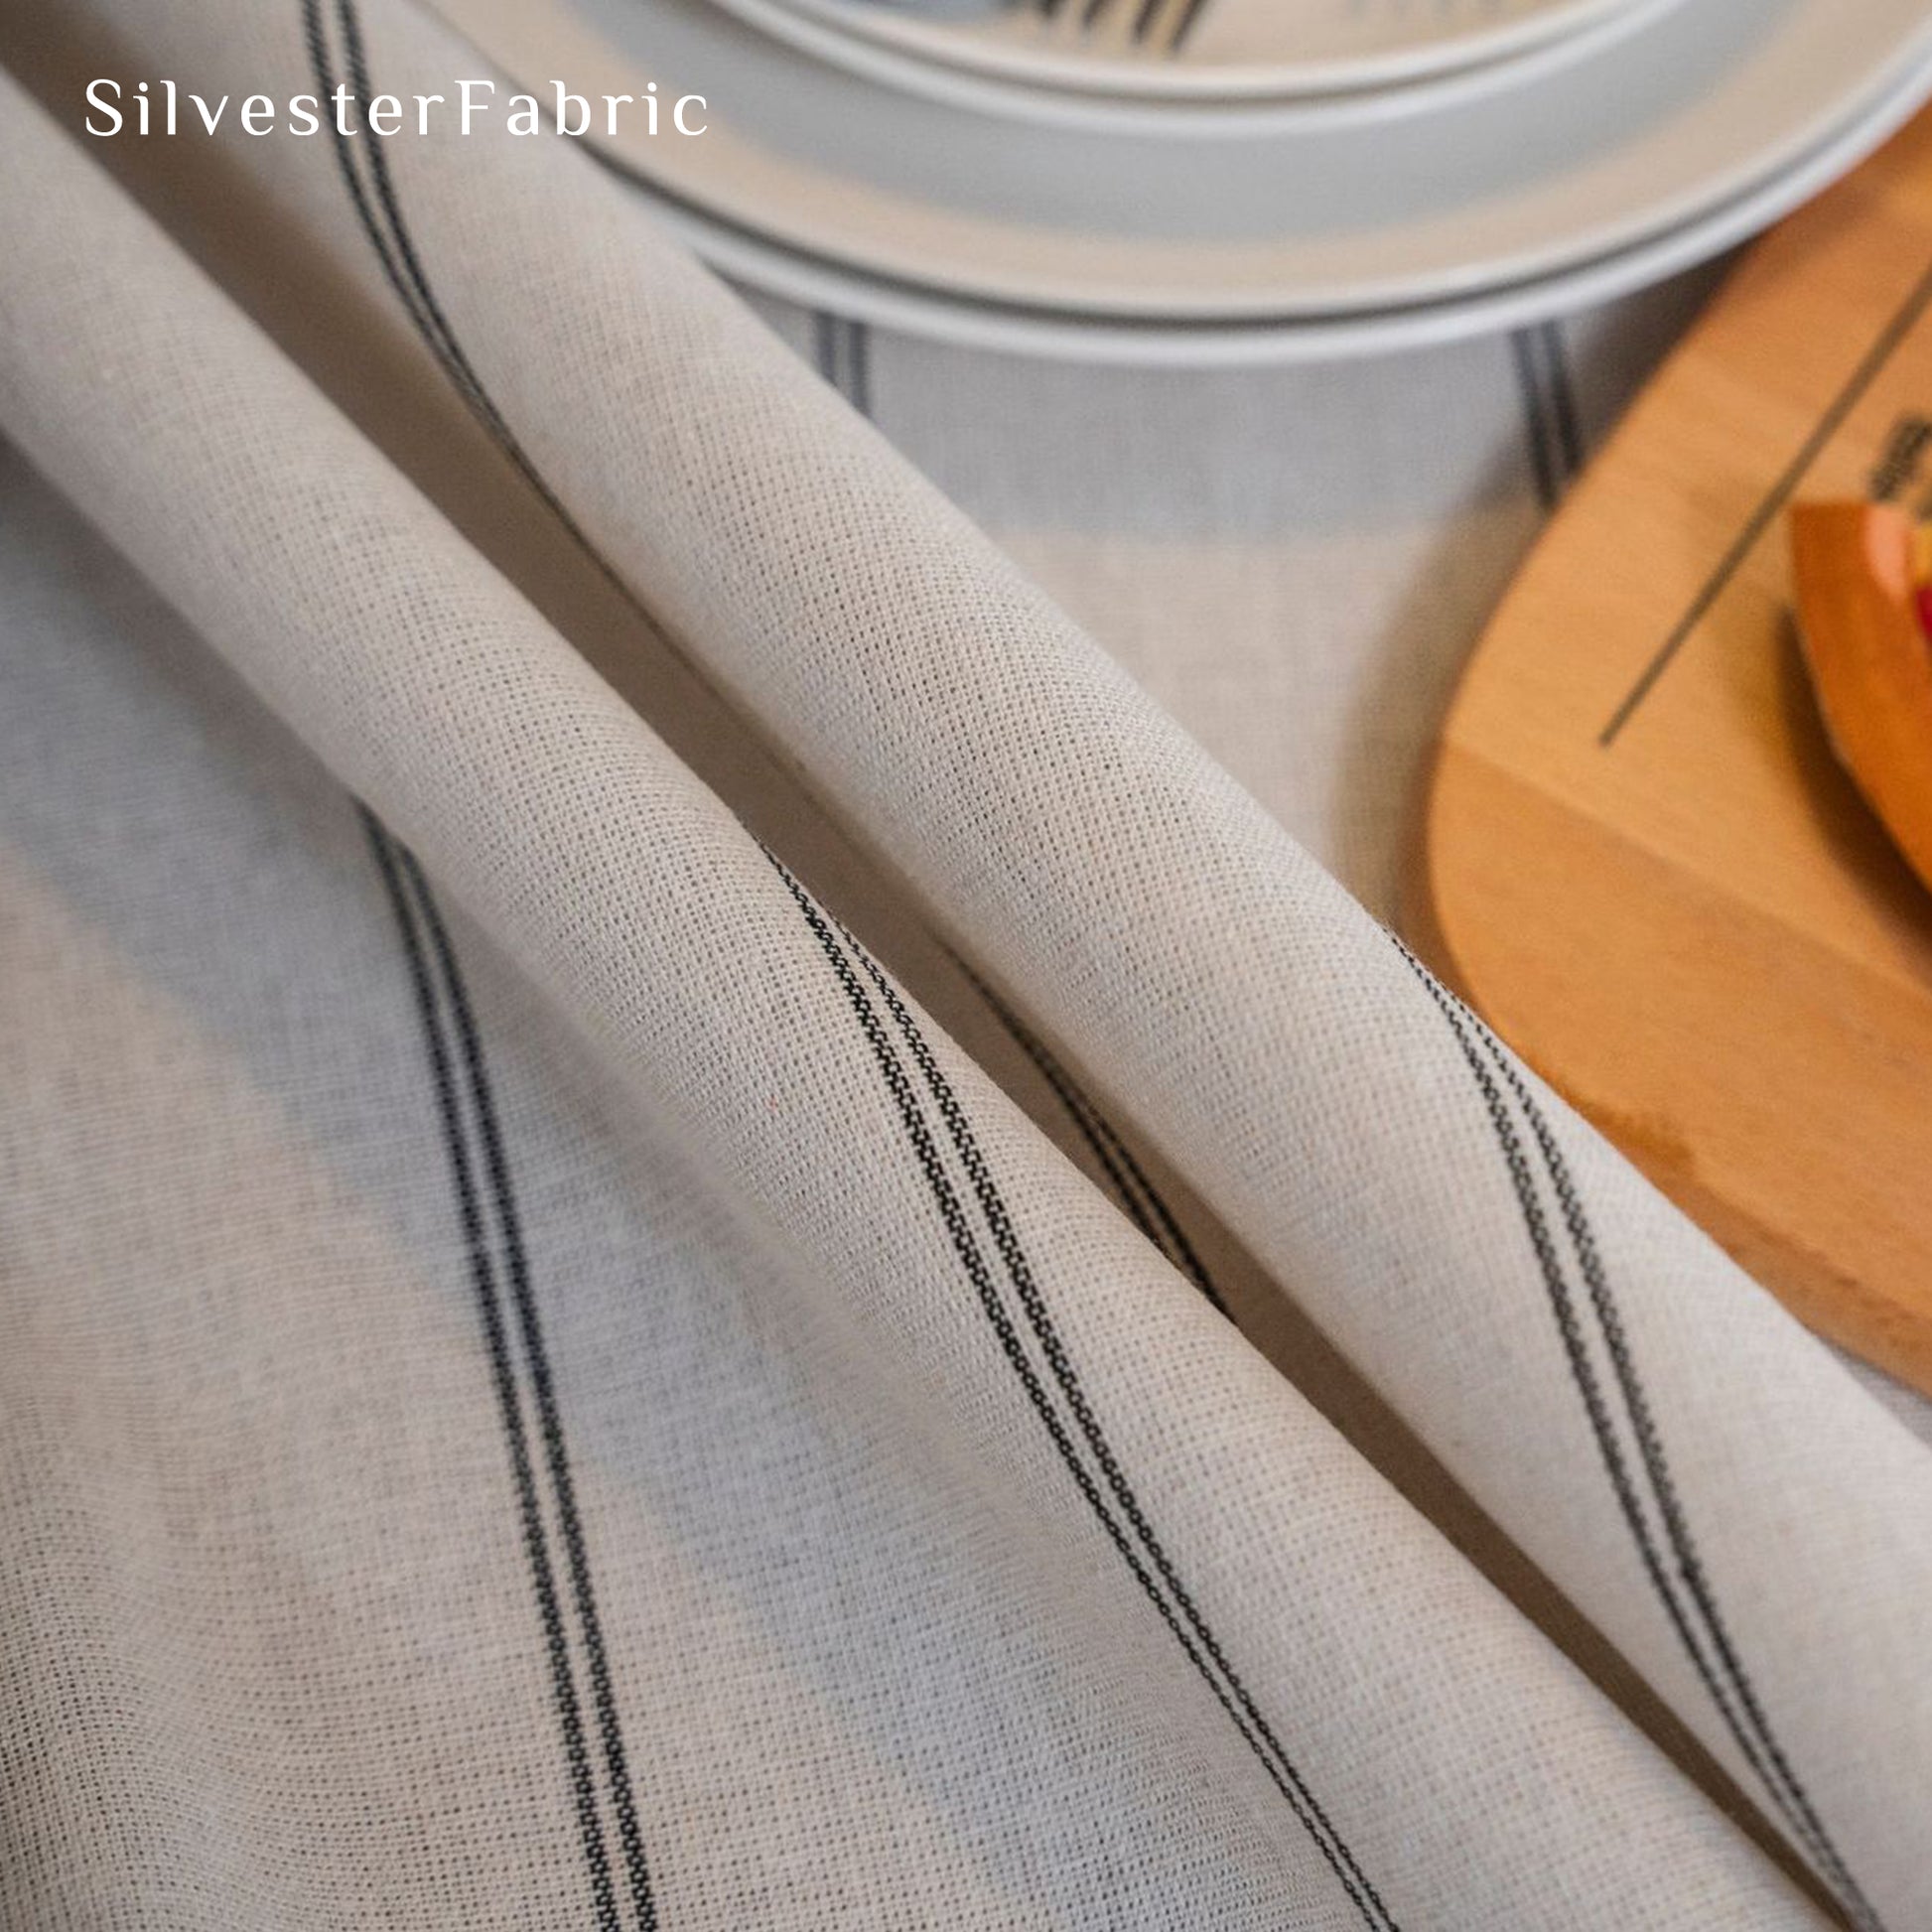 Striped Square Tablecloth丨Free Shipping - Silvester Fabric